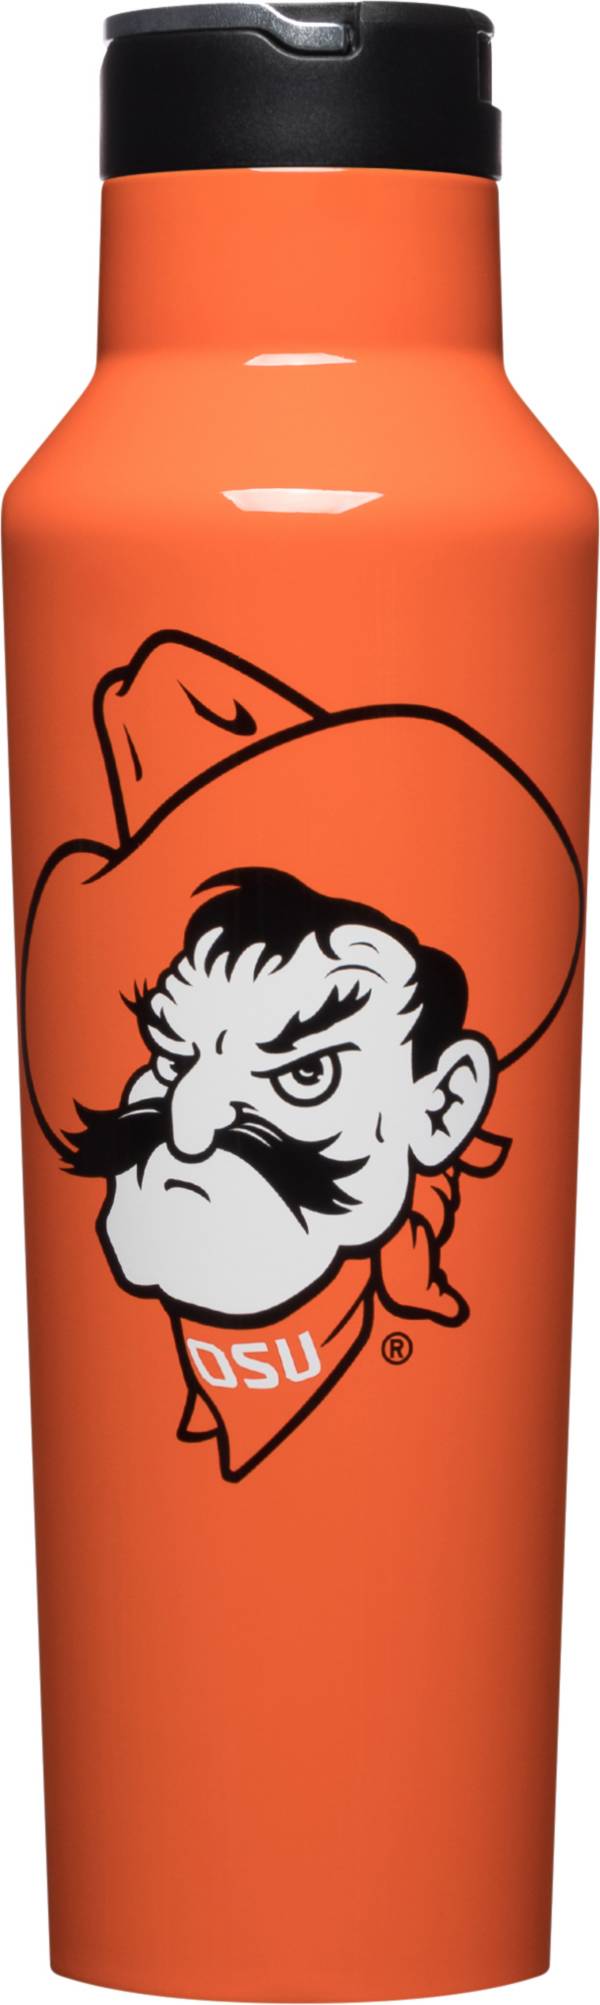 Corkcicle Oklahoma State Cowboys 20oz. Canteen product image